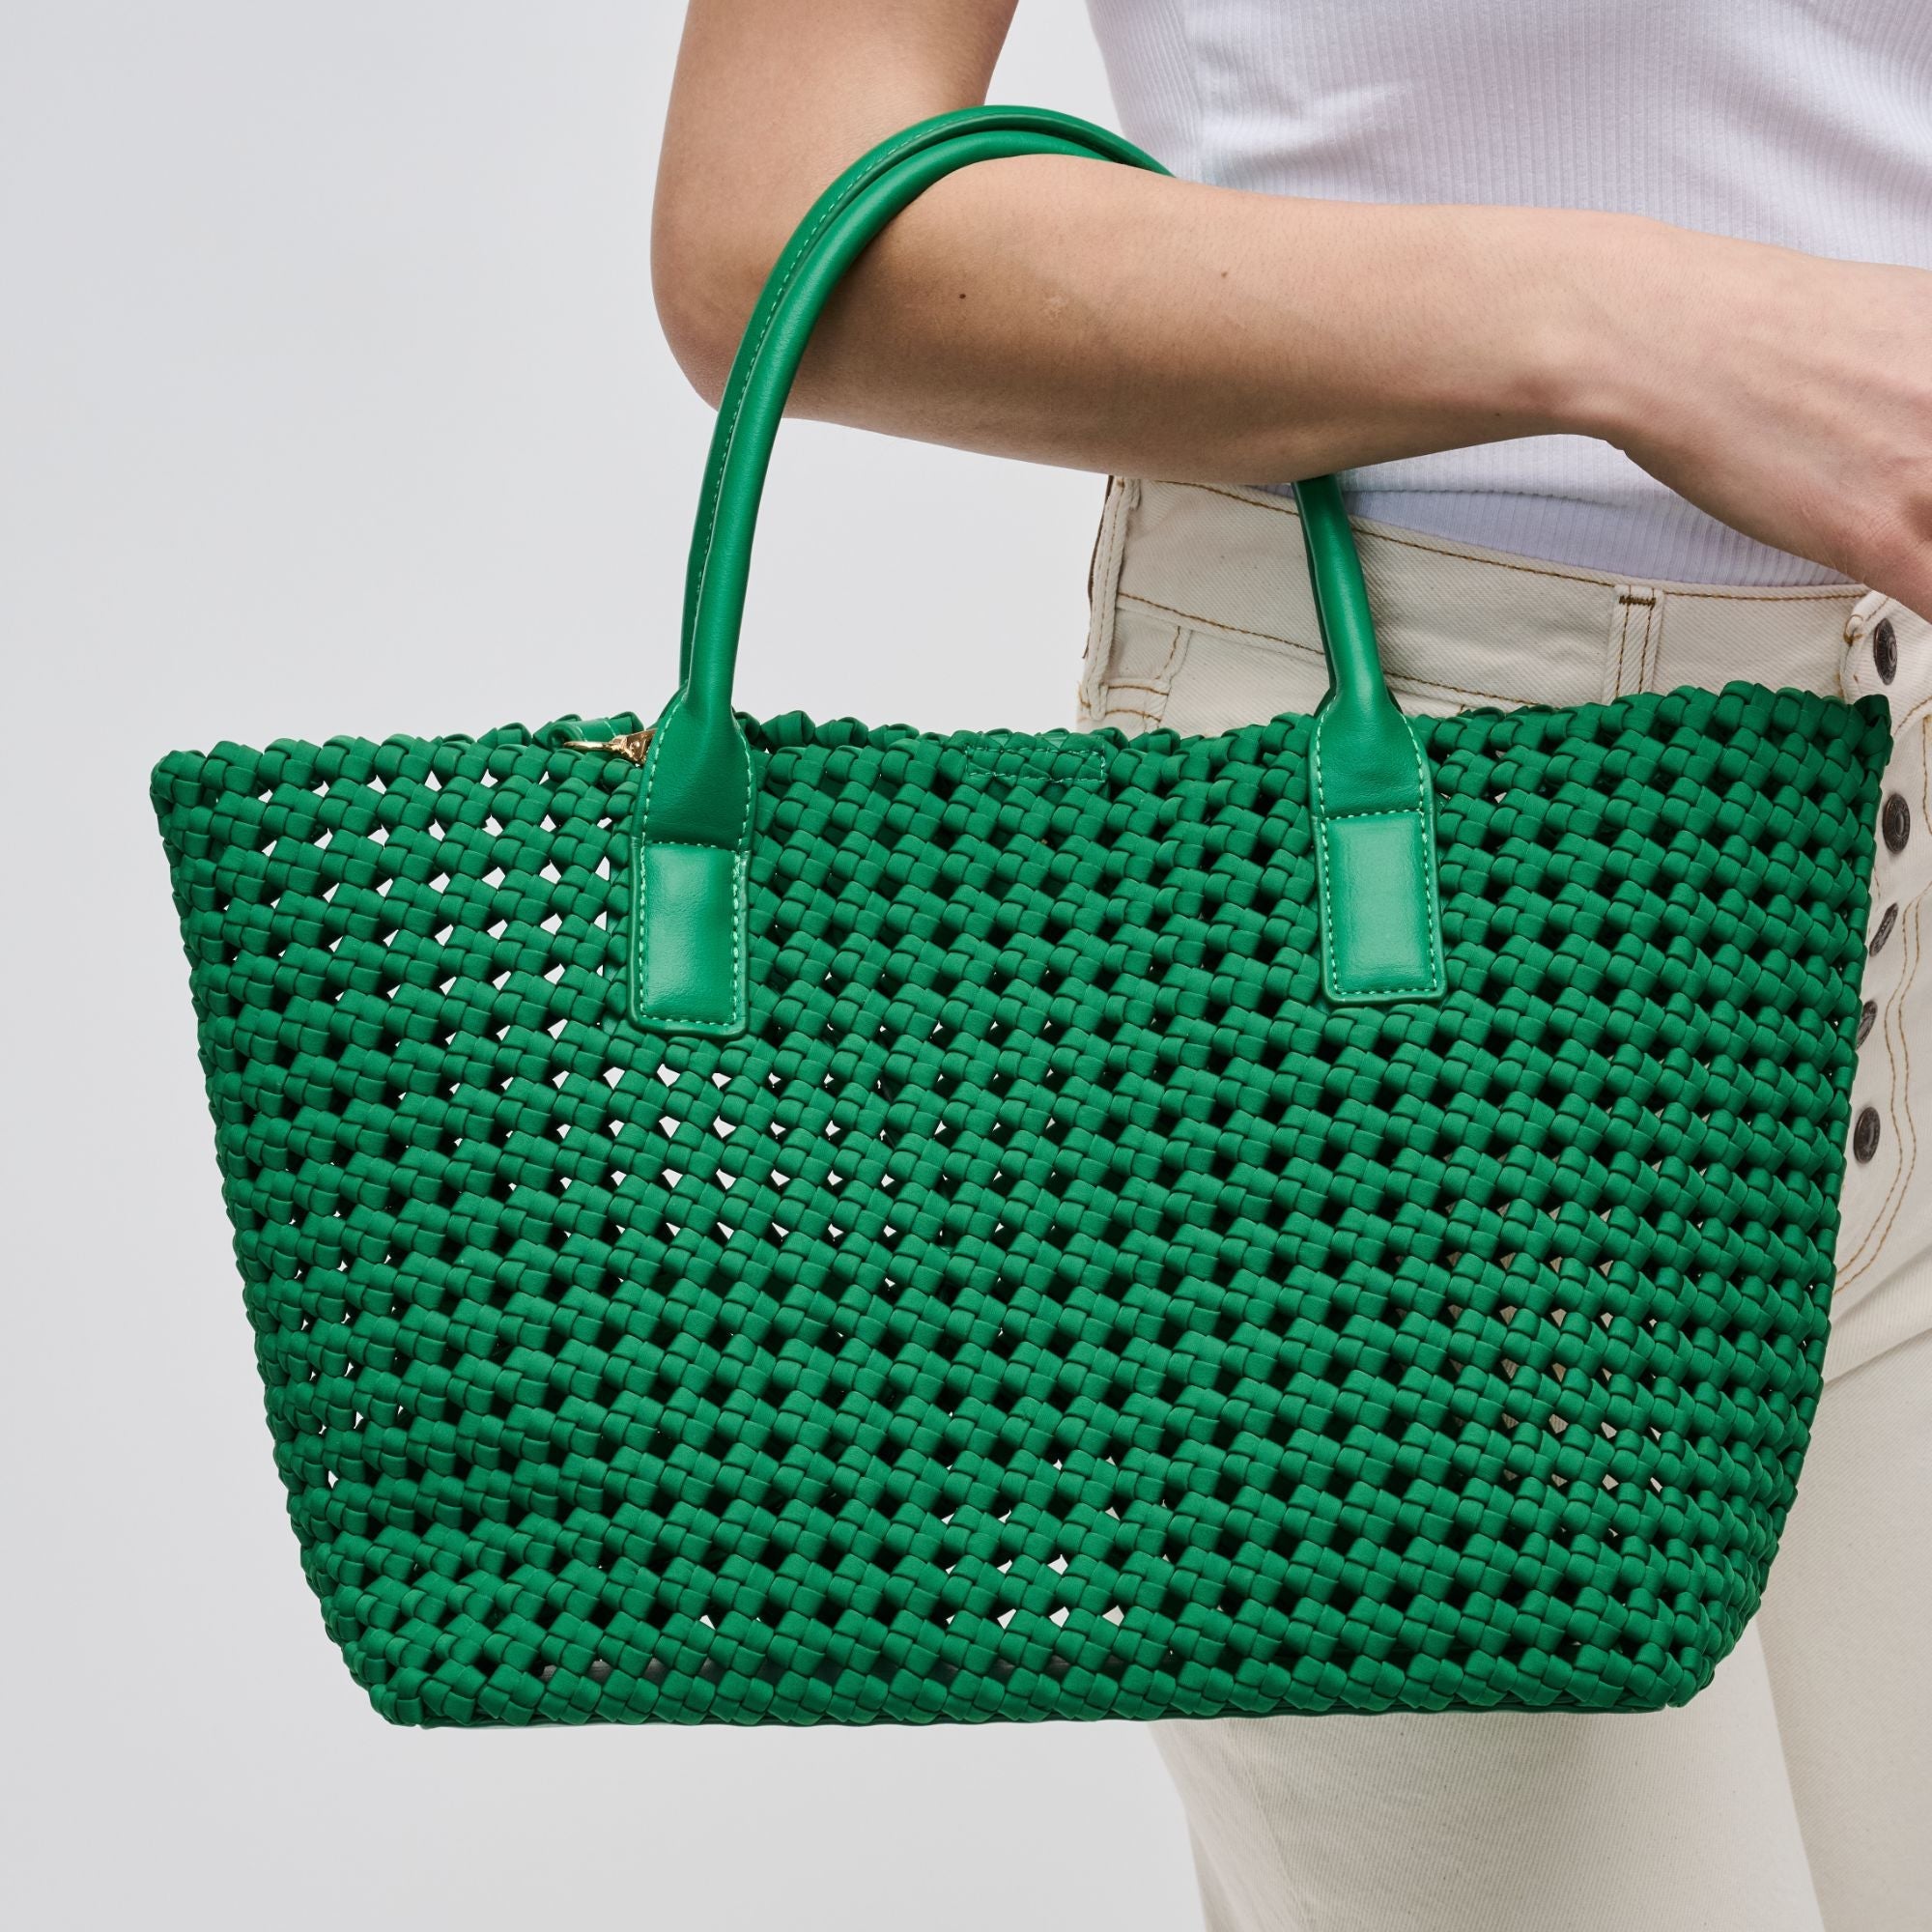 a model holding a woven green tote bag